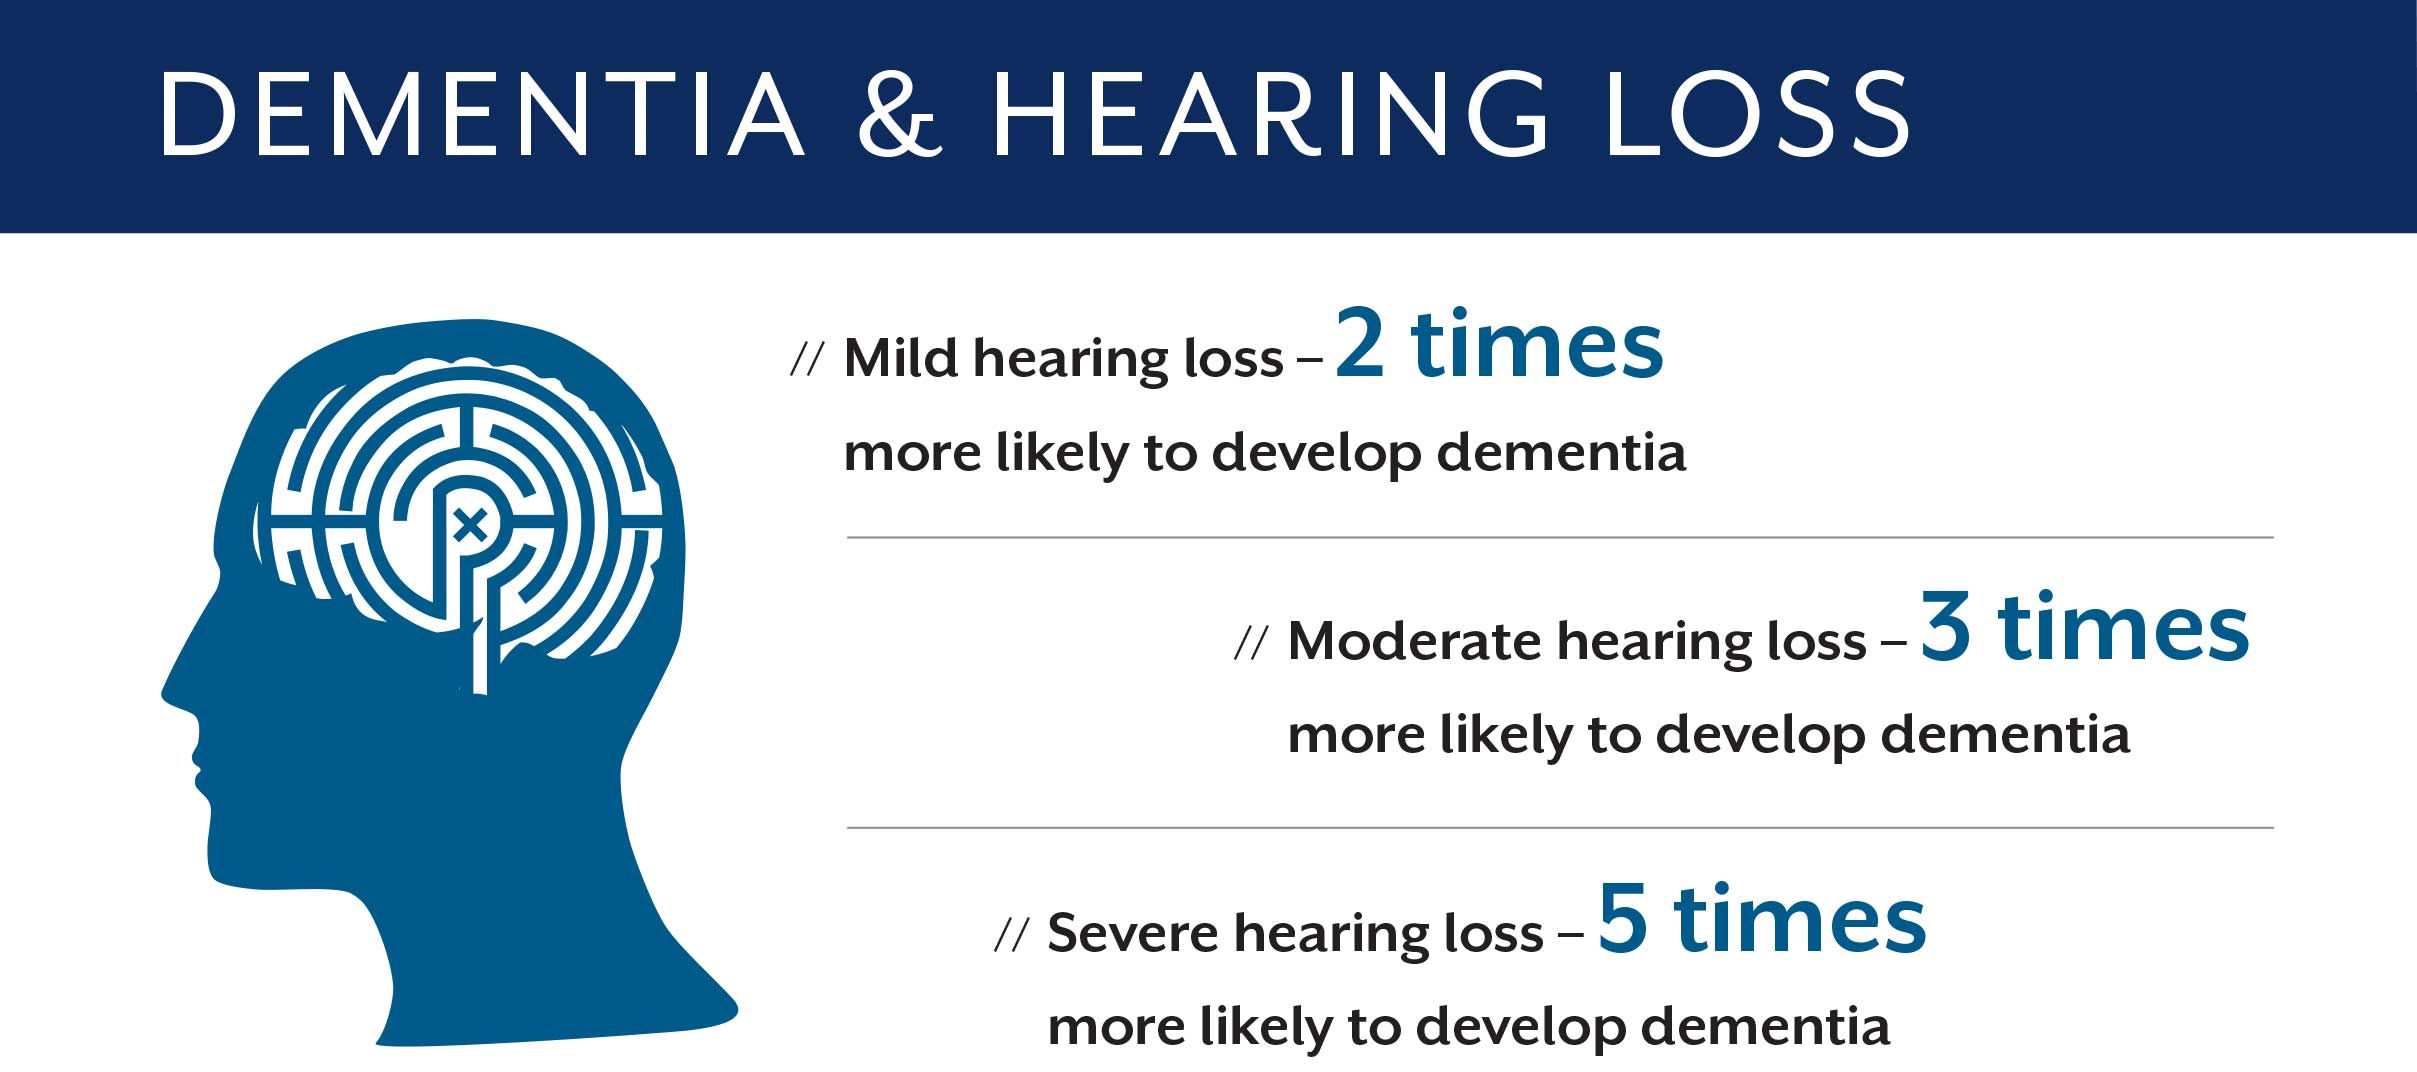 Dementia and hearing loss